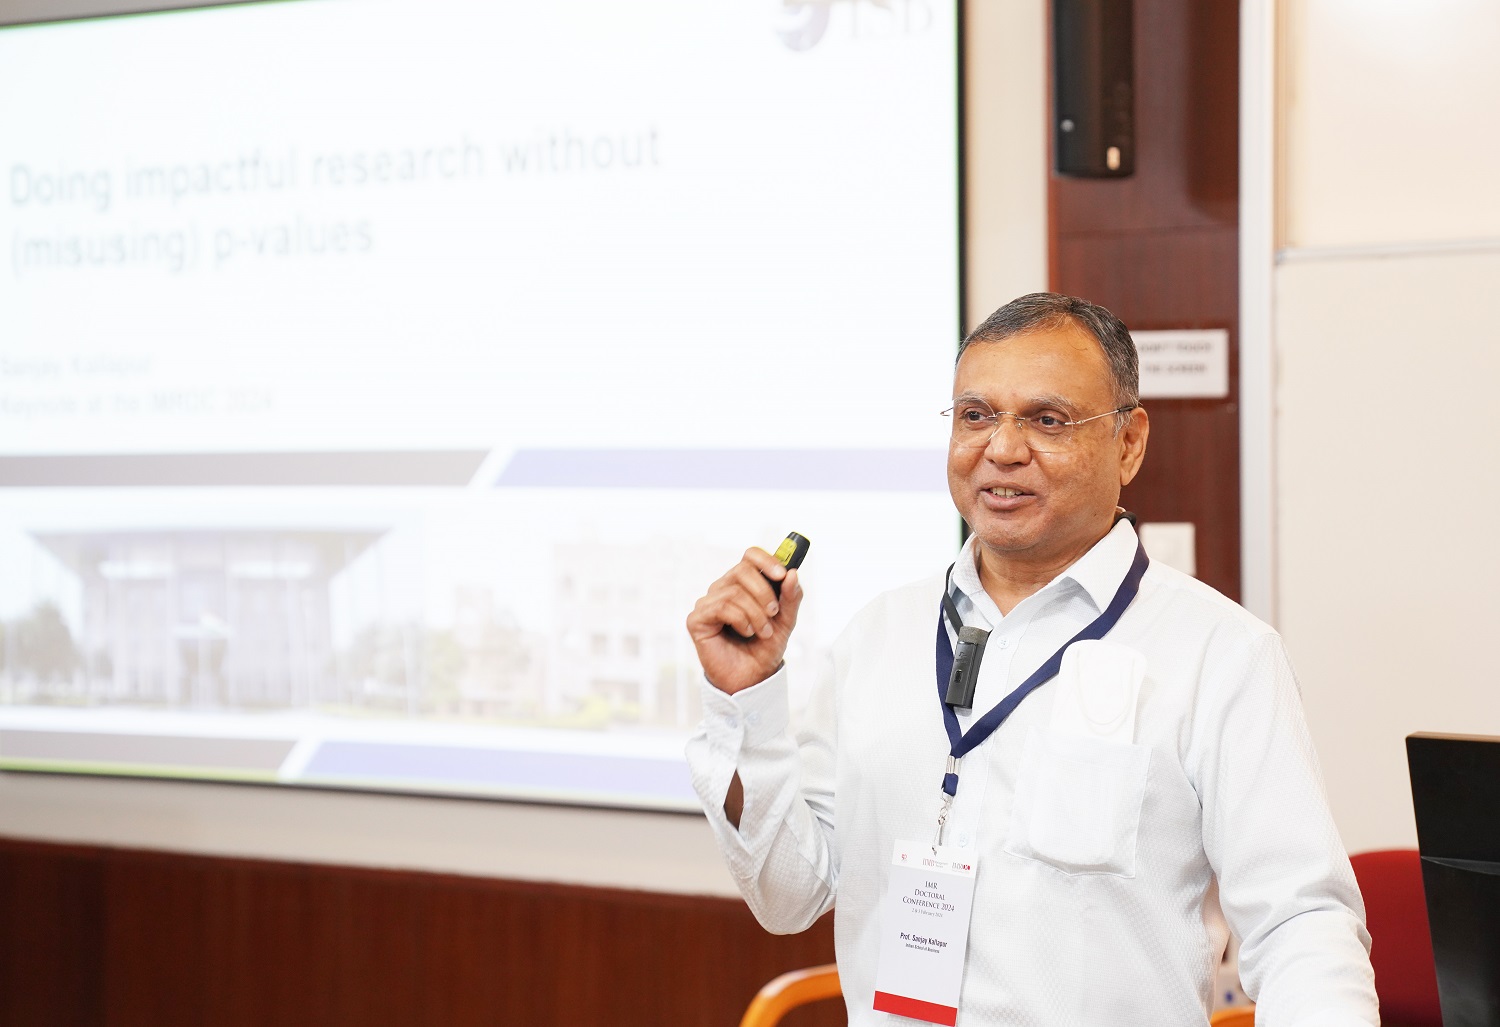 Professor Sanjay Kallapur from the Accounting department at the Indian School of Business, delivers the first keynote address on 'Doing Impactful Research Without (Misusing) P-values.'